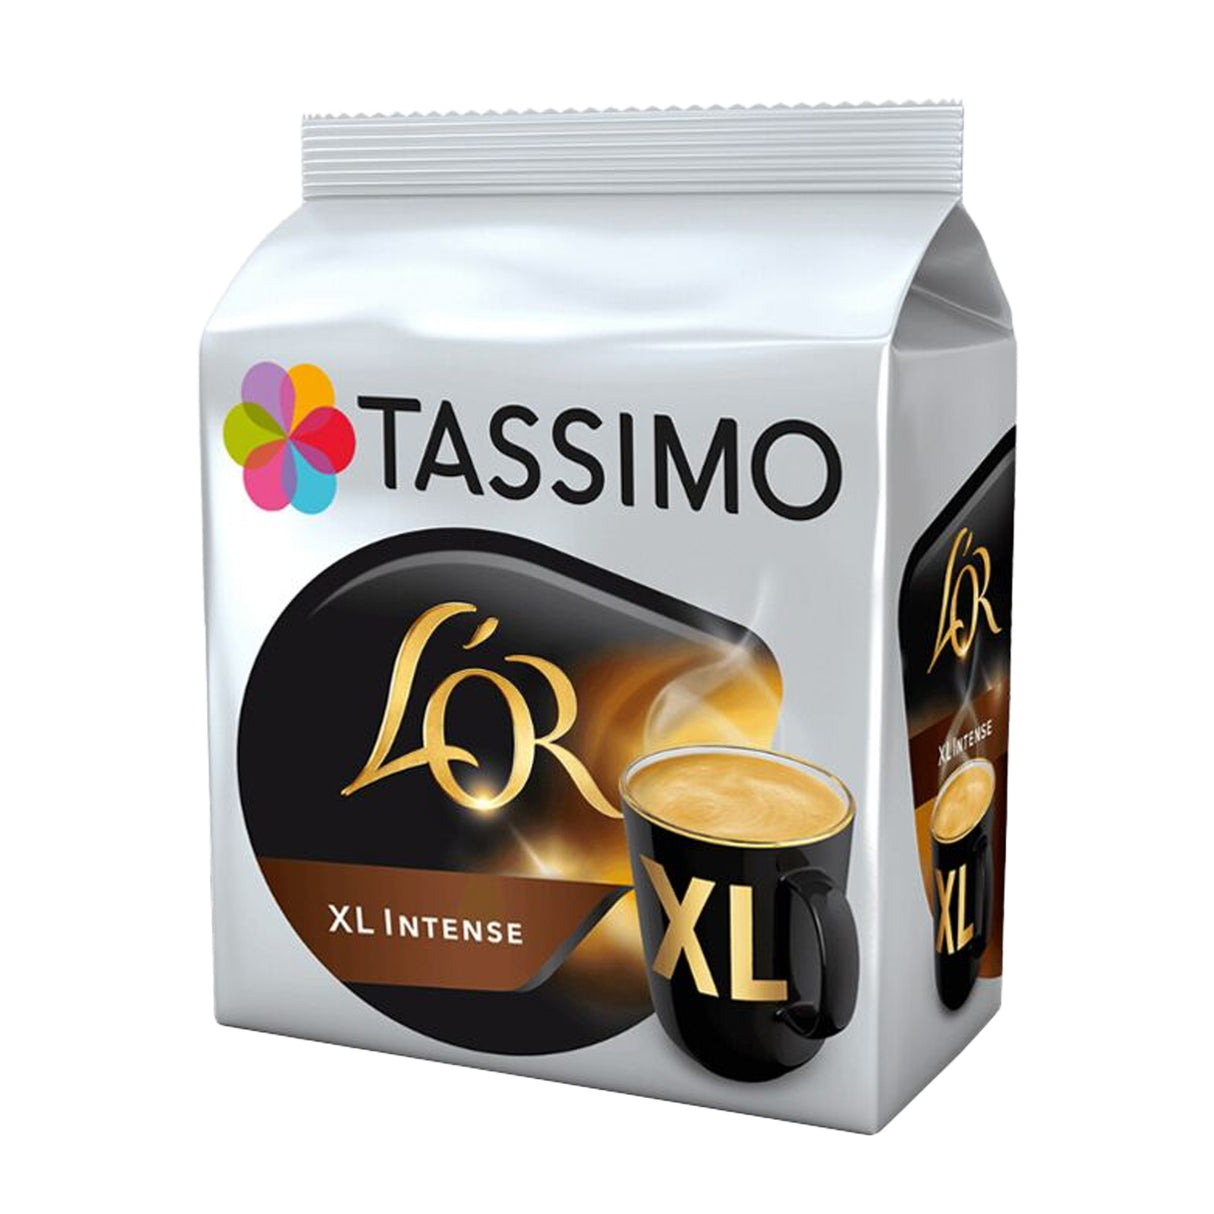 Tassimo L'OR XL Intense pack